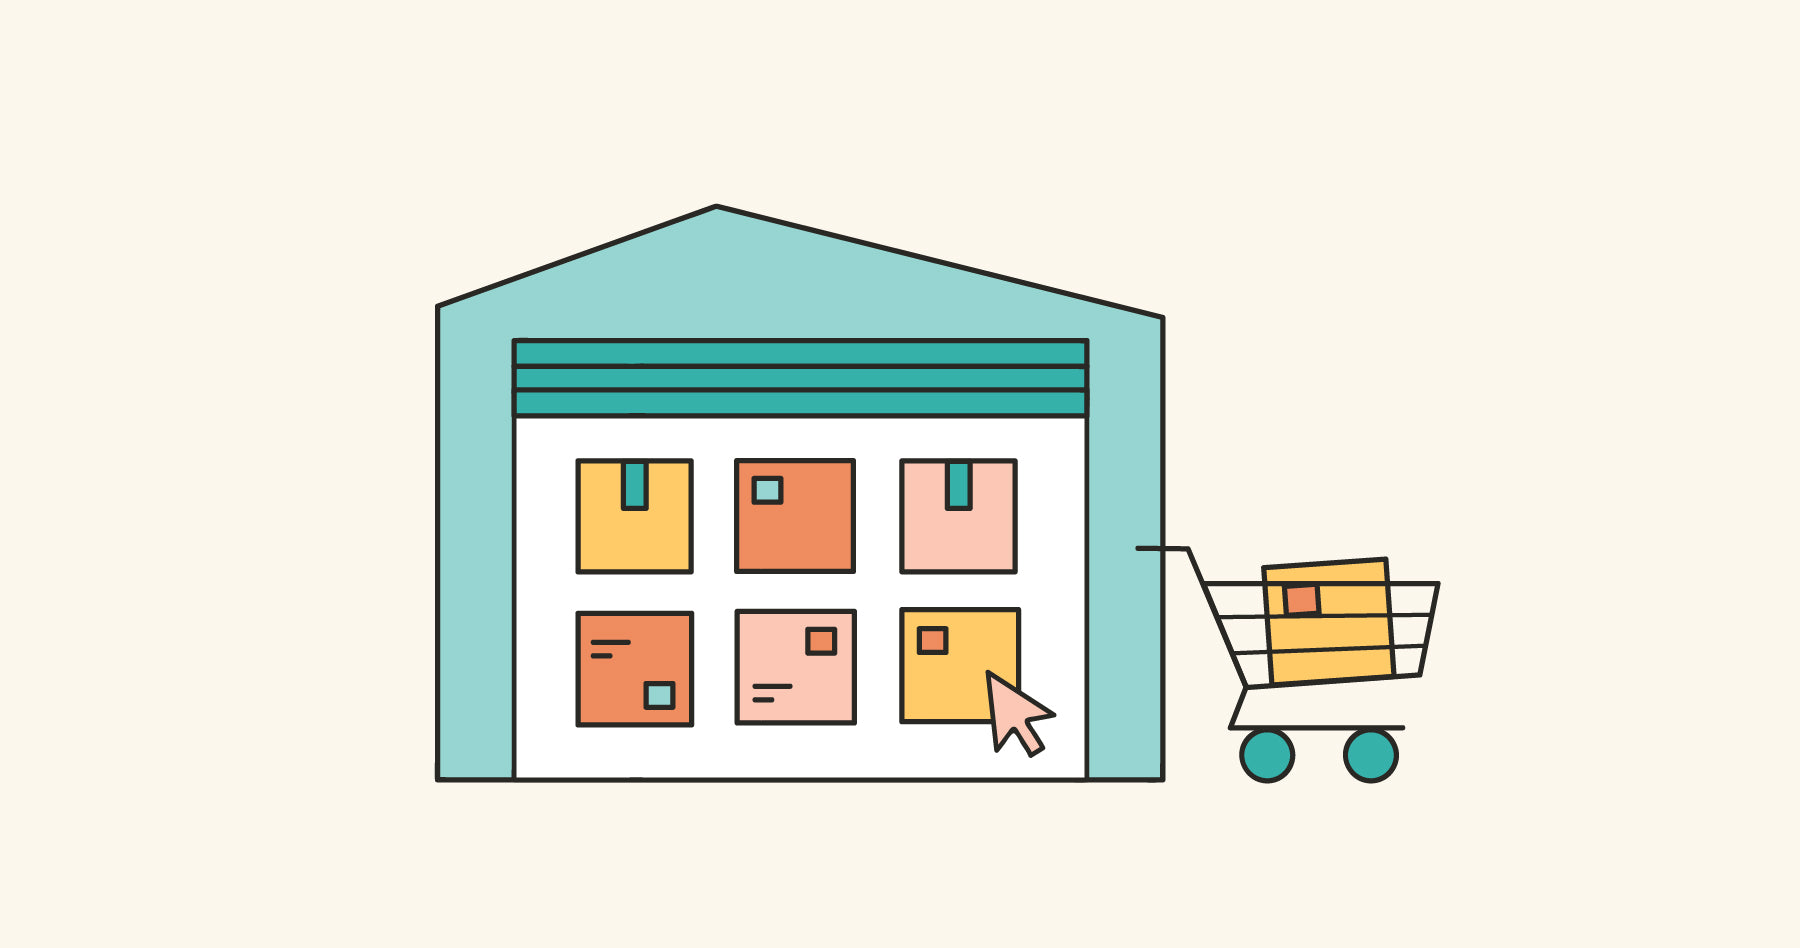 Illustration of a warehouse with packages inside, next to a shopping cart containing a package.